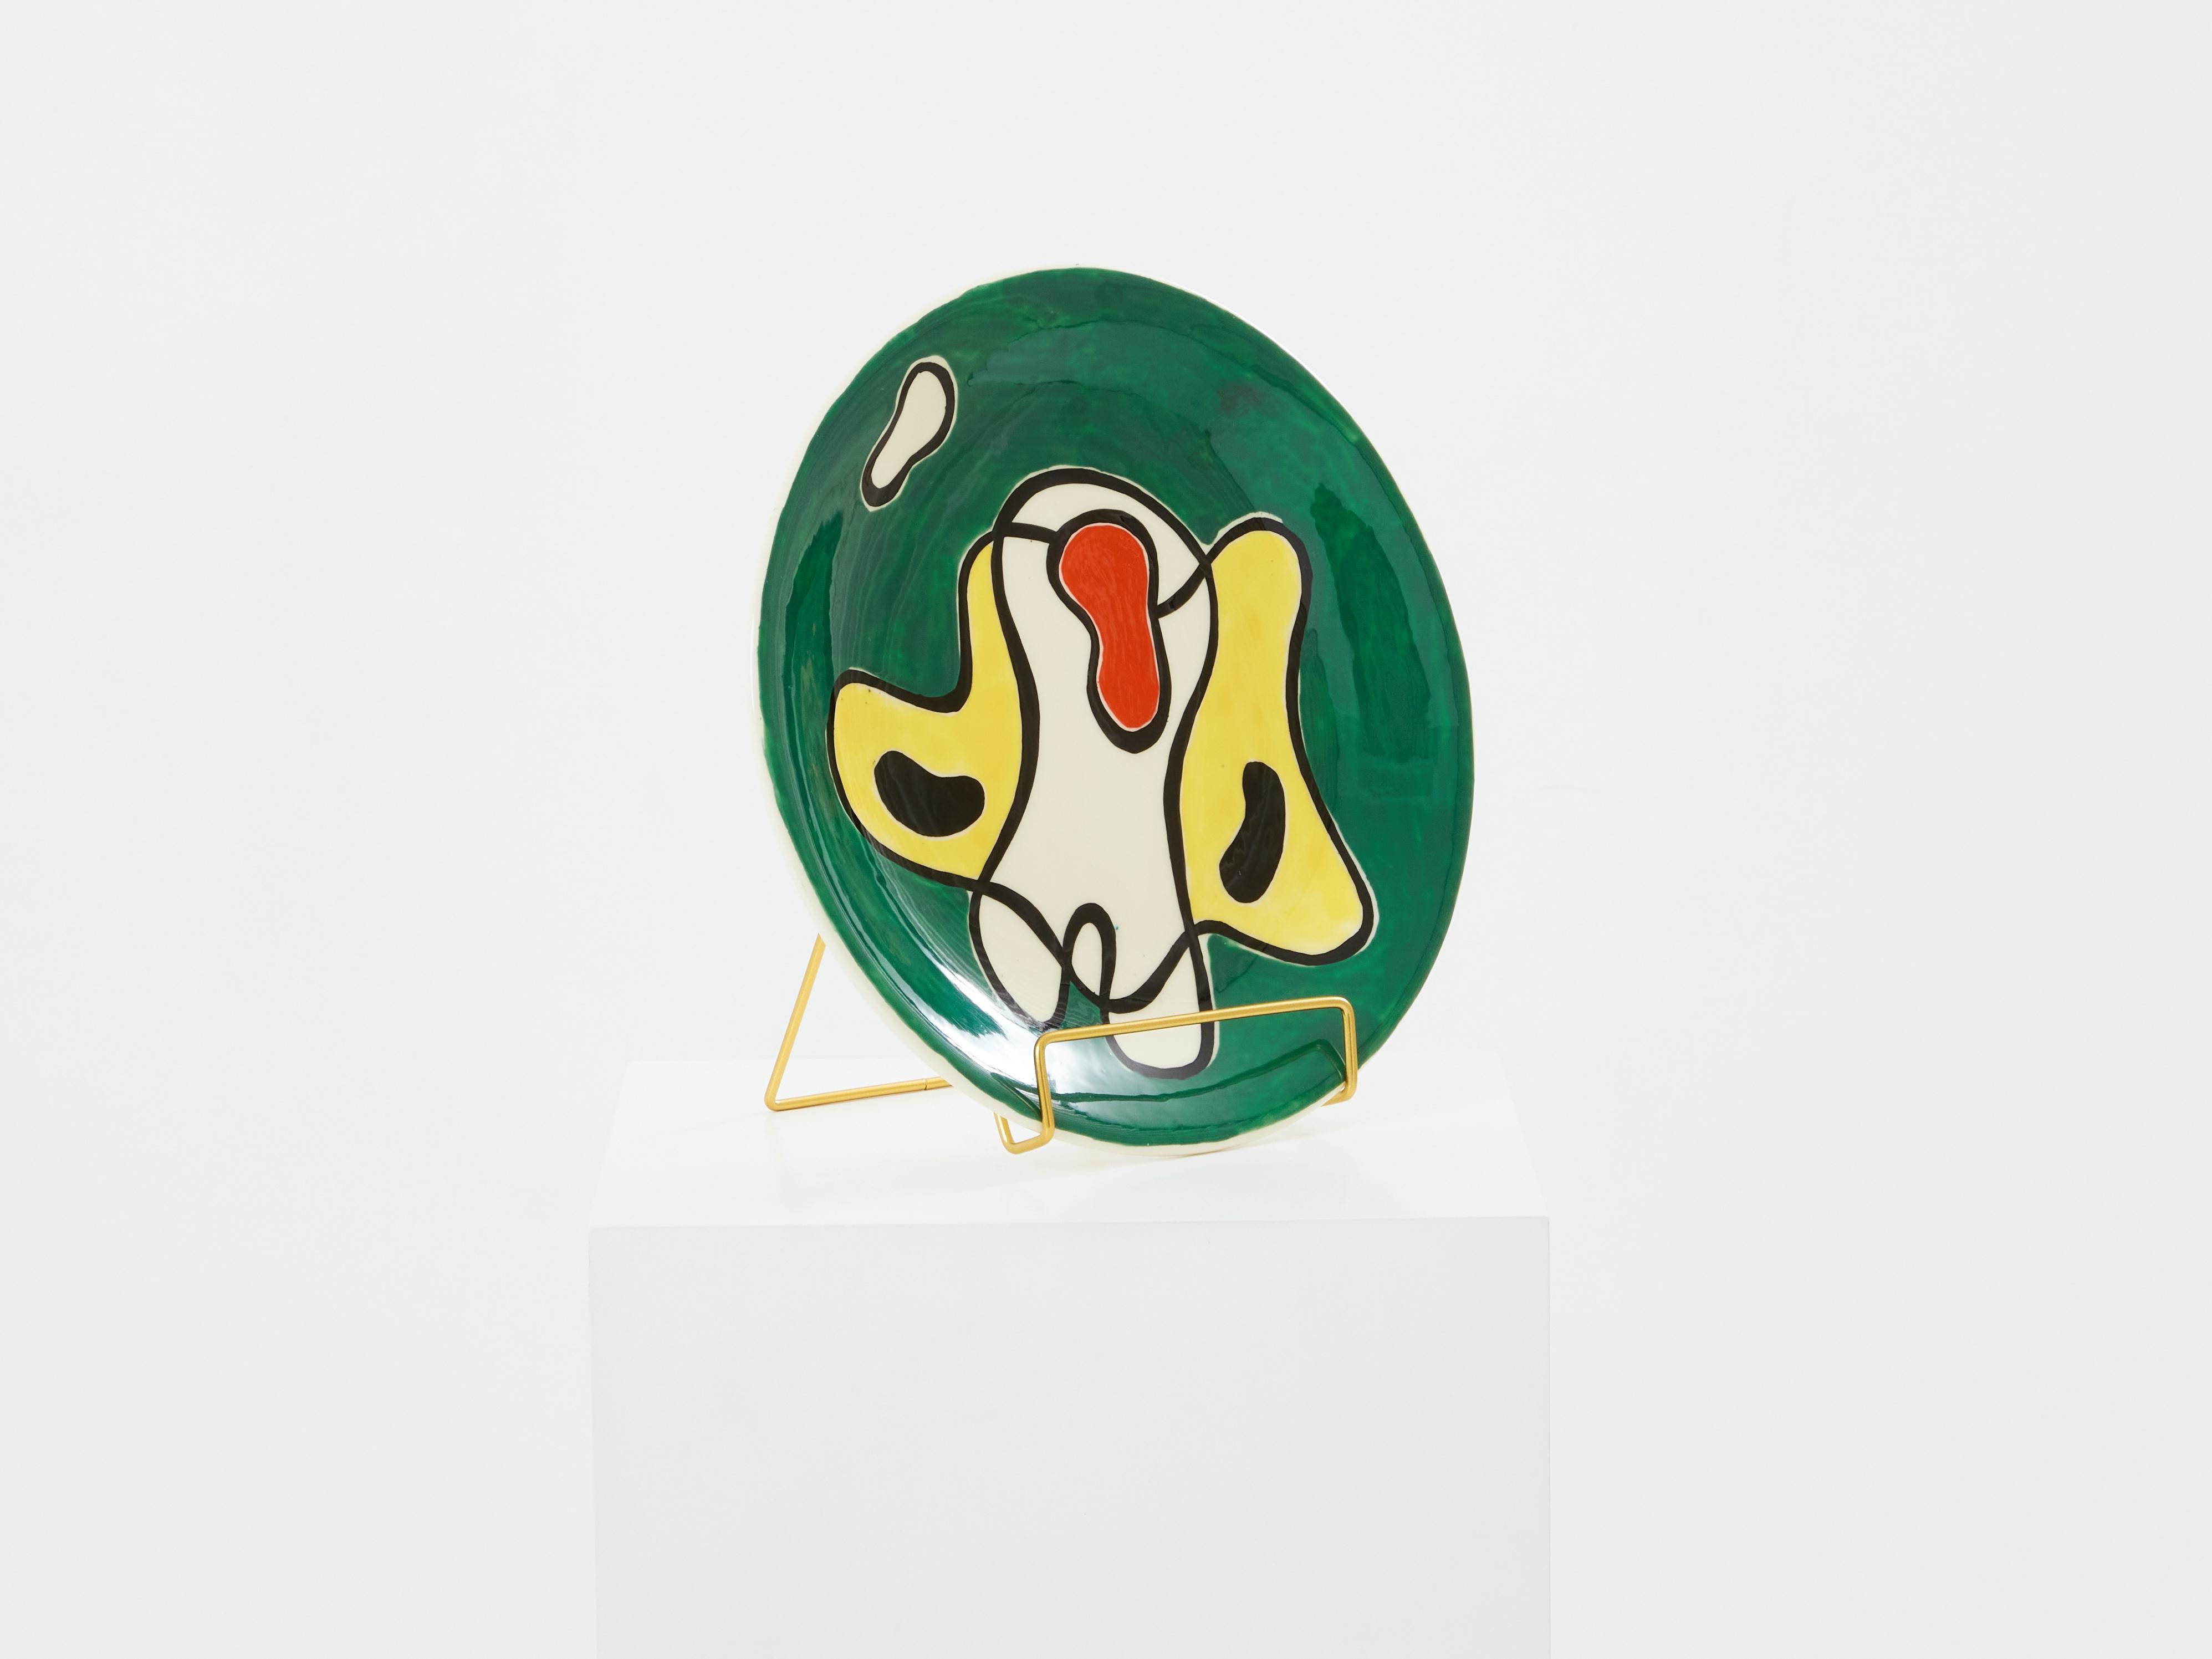 This colourful glazed ceramic round plate was designed and produced by Roland Brice in the 1950s in his workshop in Biot, a small city near Vallauris in the south of France. Roland Brice was the former student of Fernand Léger. He became his close